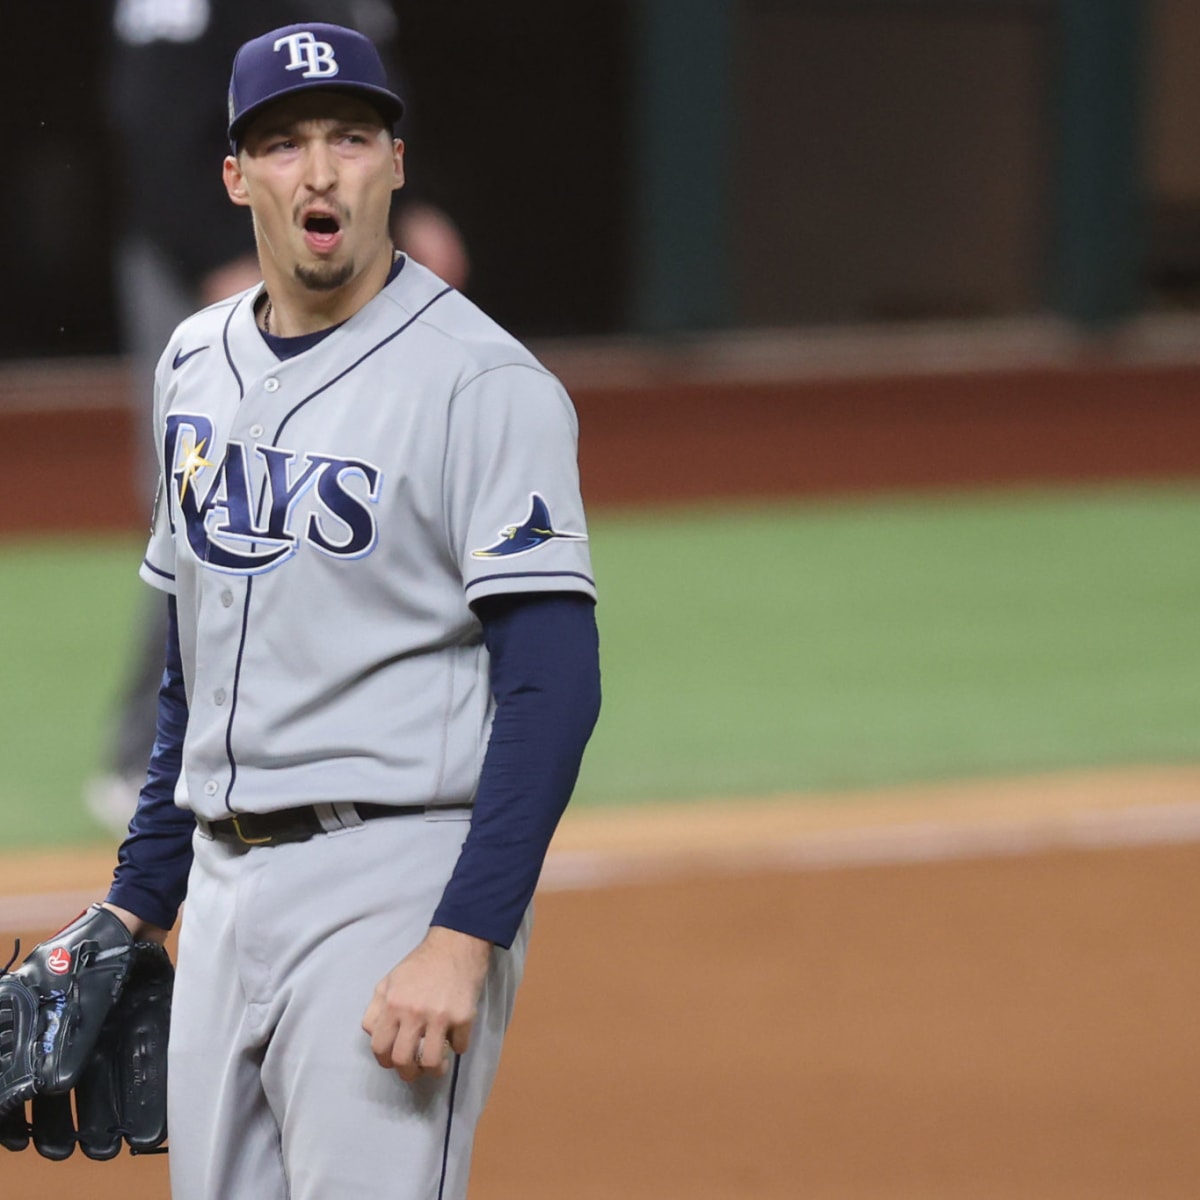 Padres acquire Blake Snell from Rays in blockbuster trade